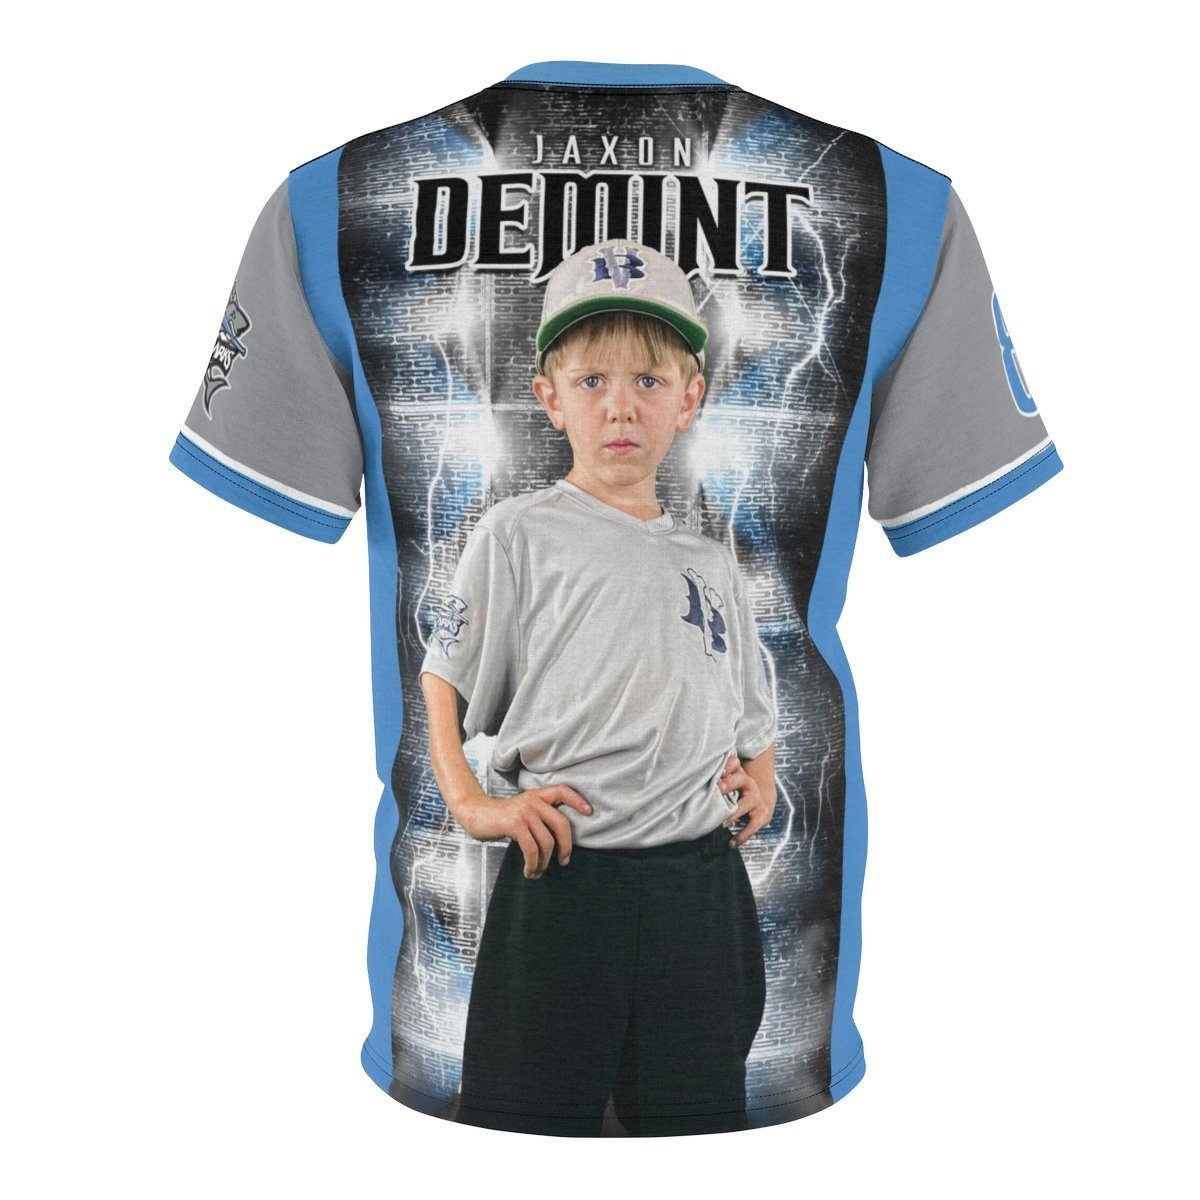 Spark - V.5 - Extreme Sportswear Cut & Sew Shirt Template-Photoshop Template - Photo Solutions